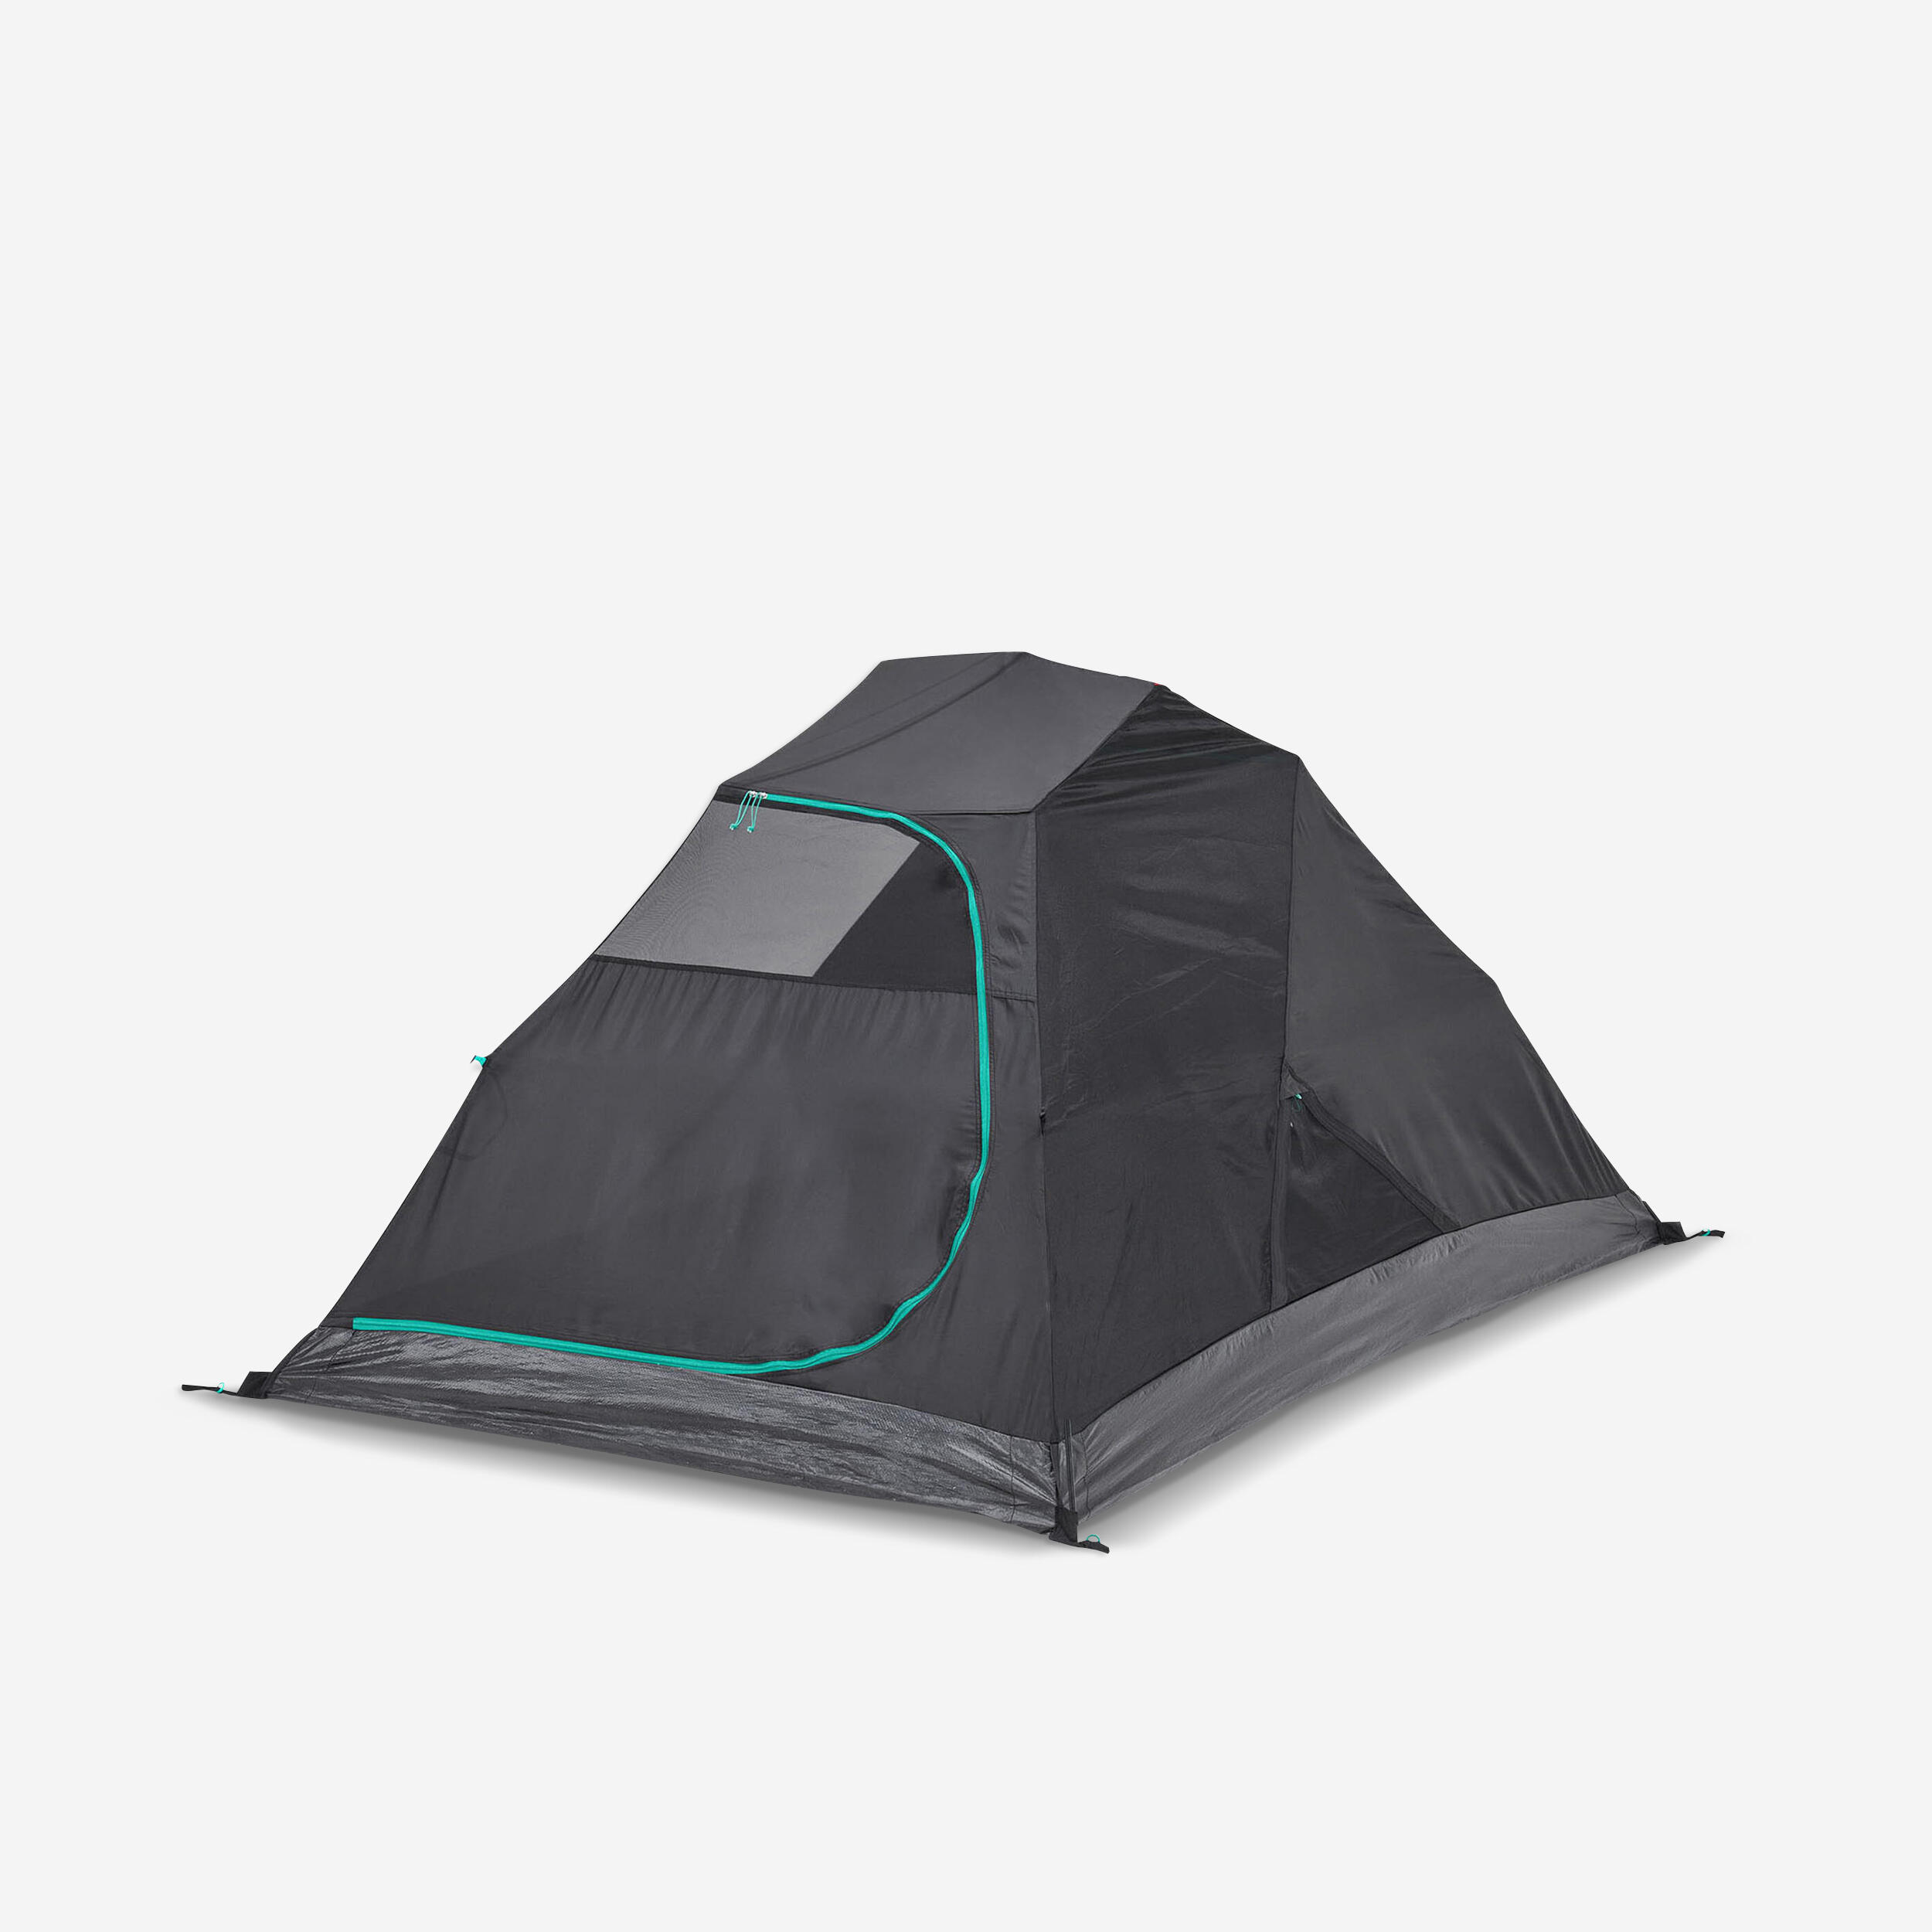 QUECHUA Bedroom Spare Part for the MH100 Fresh&Black 2-Person Tent